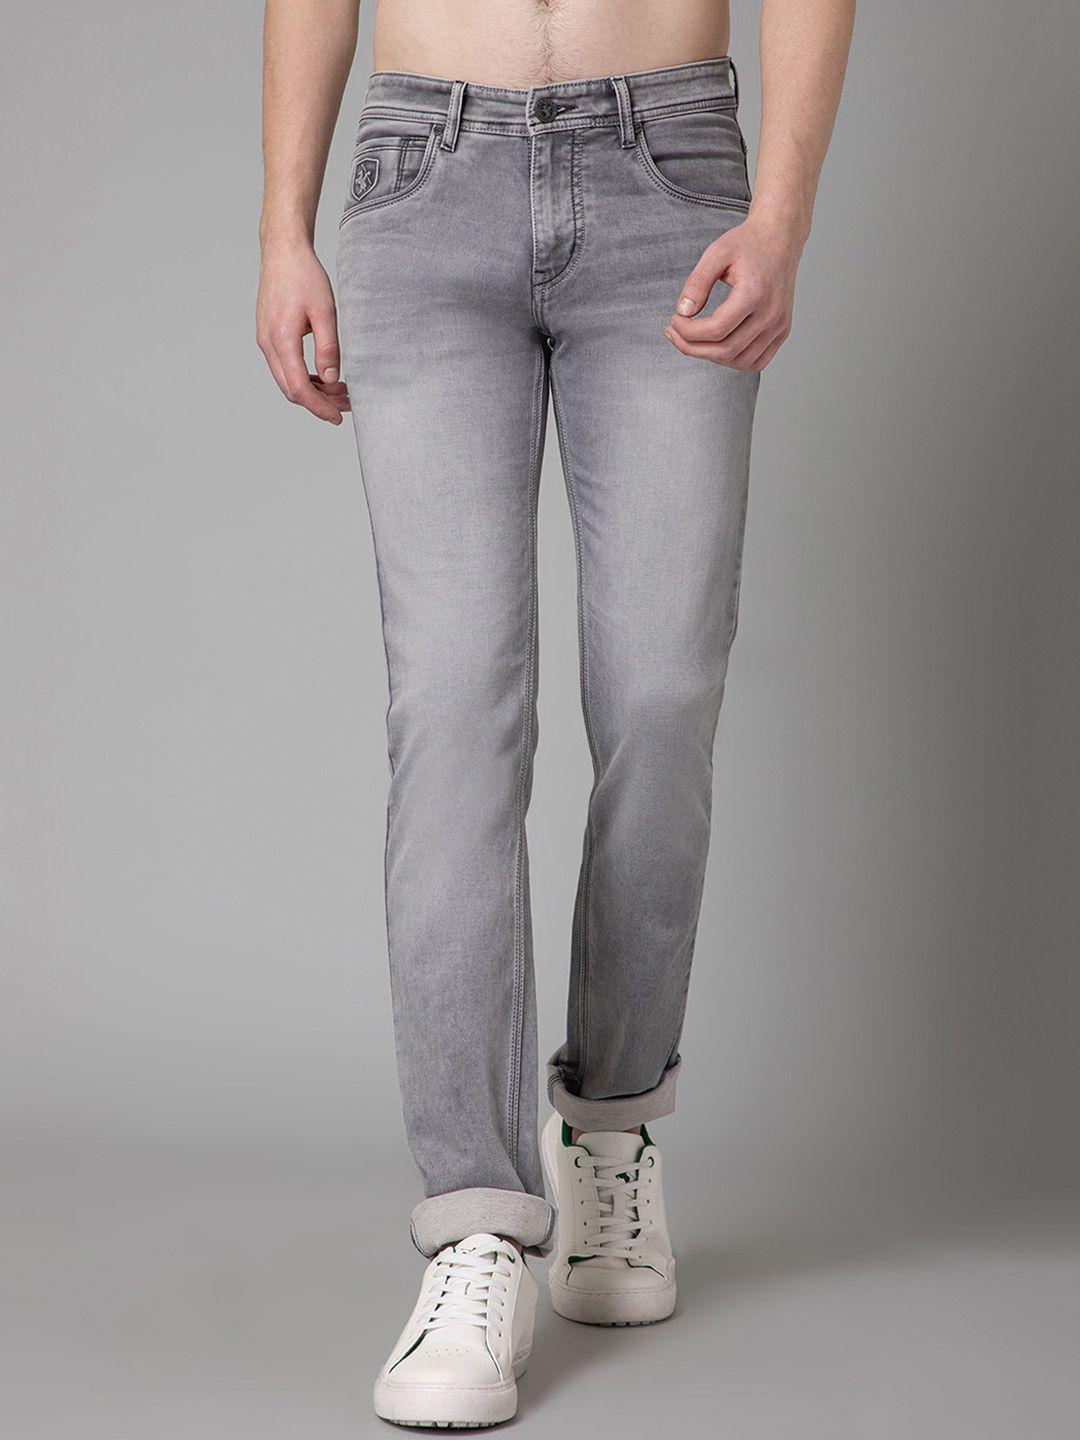 cantabil-men-mid-rise-light-shade-heavy-fade-clean-look-cotton-stretchable-jeans